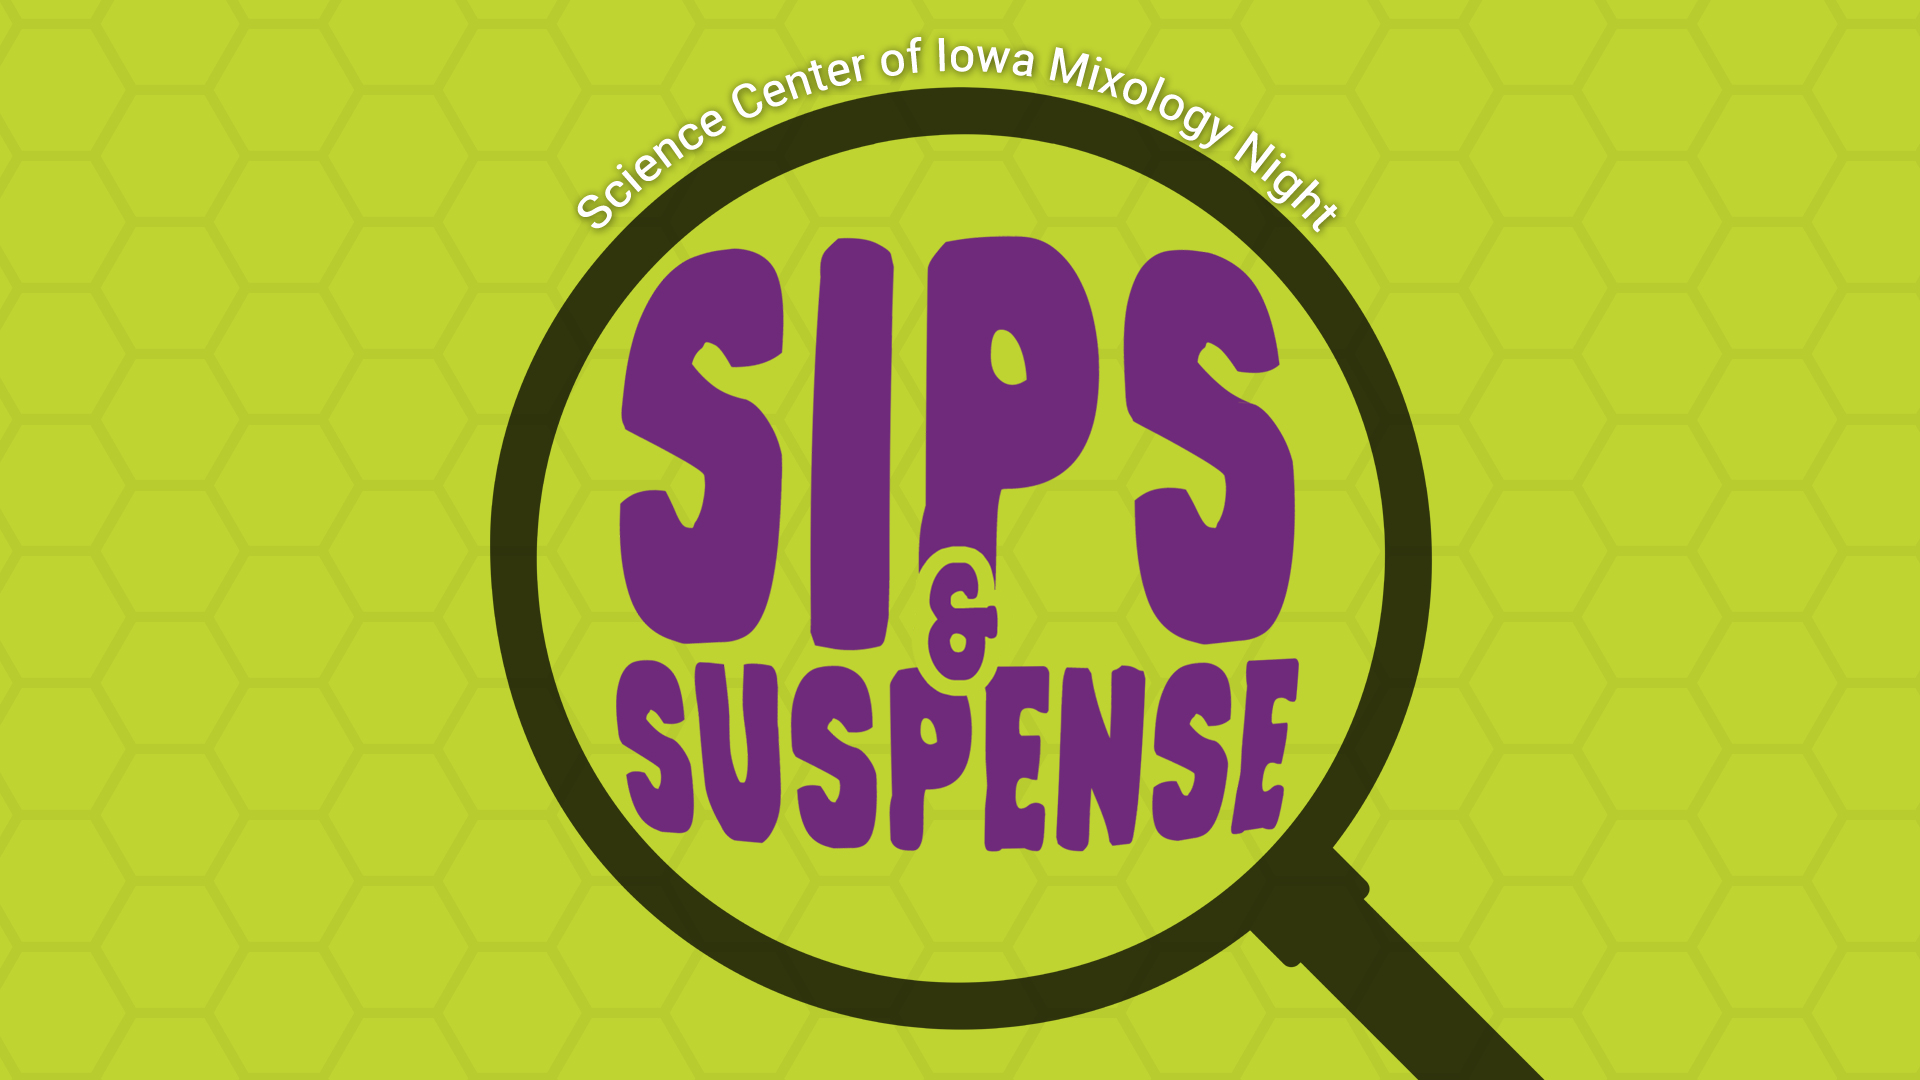 Sips and Suspense Mystery Adventure at Science Center or Iowa Mixology Night Event Image